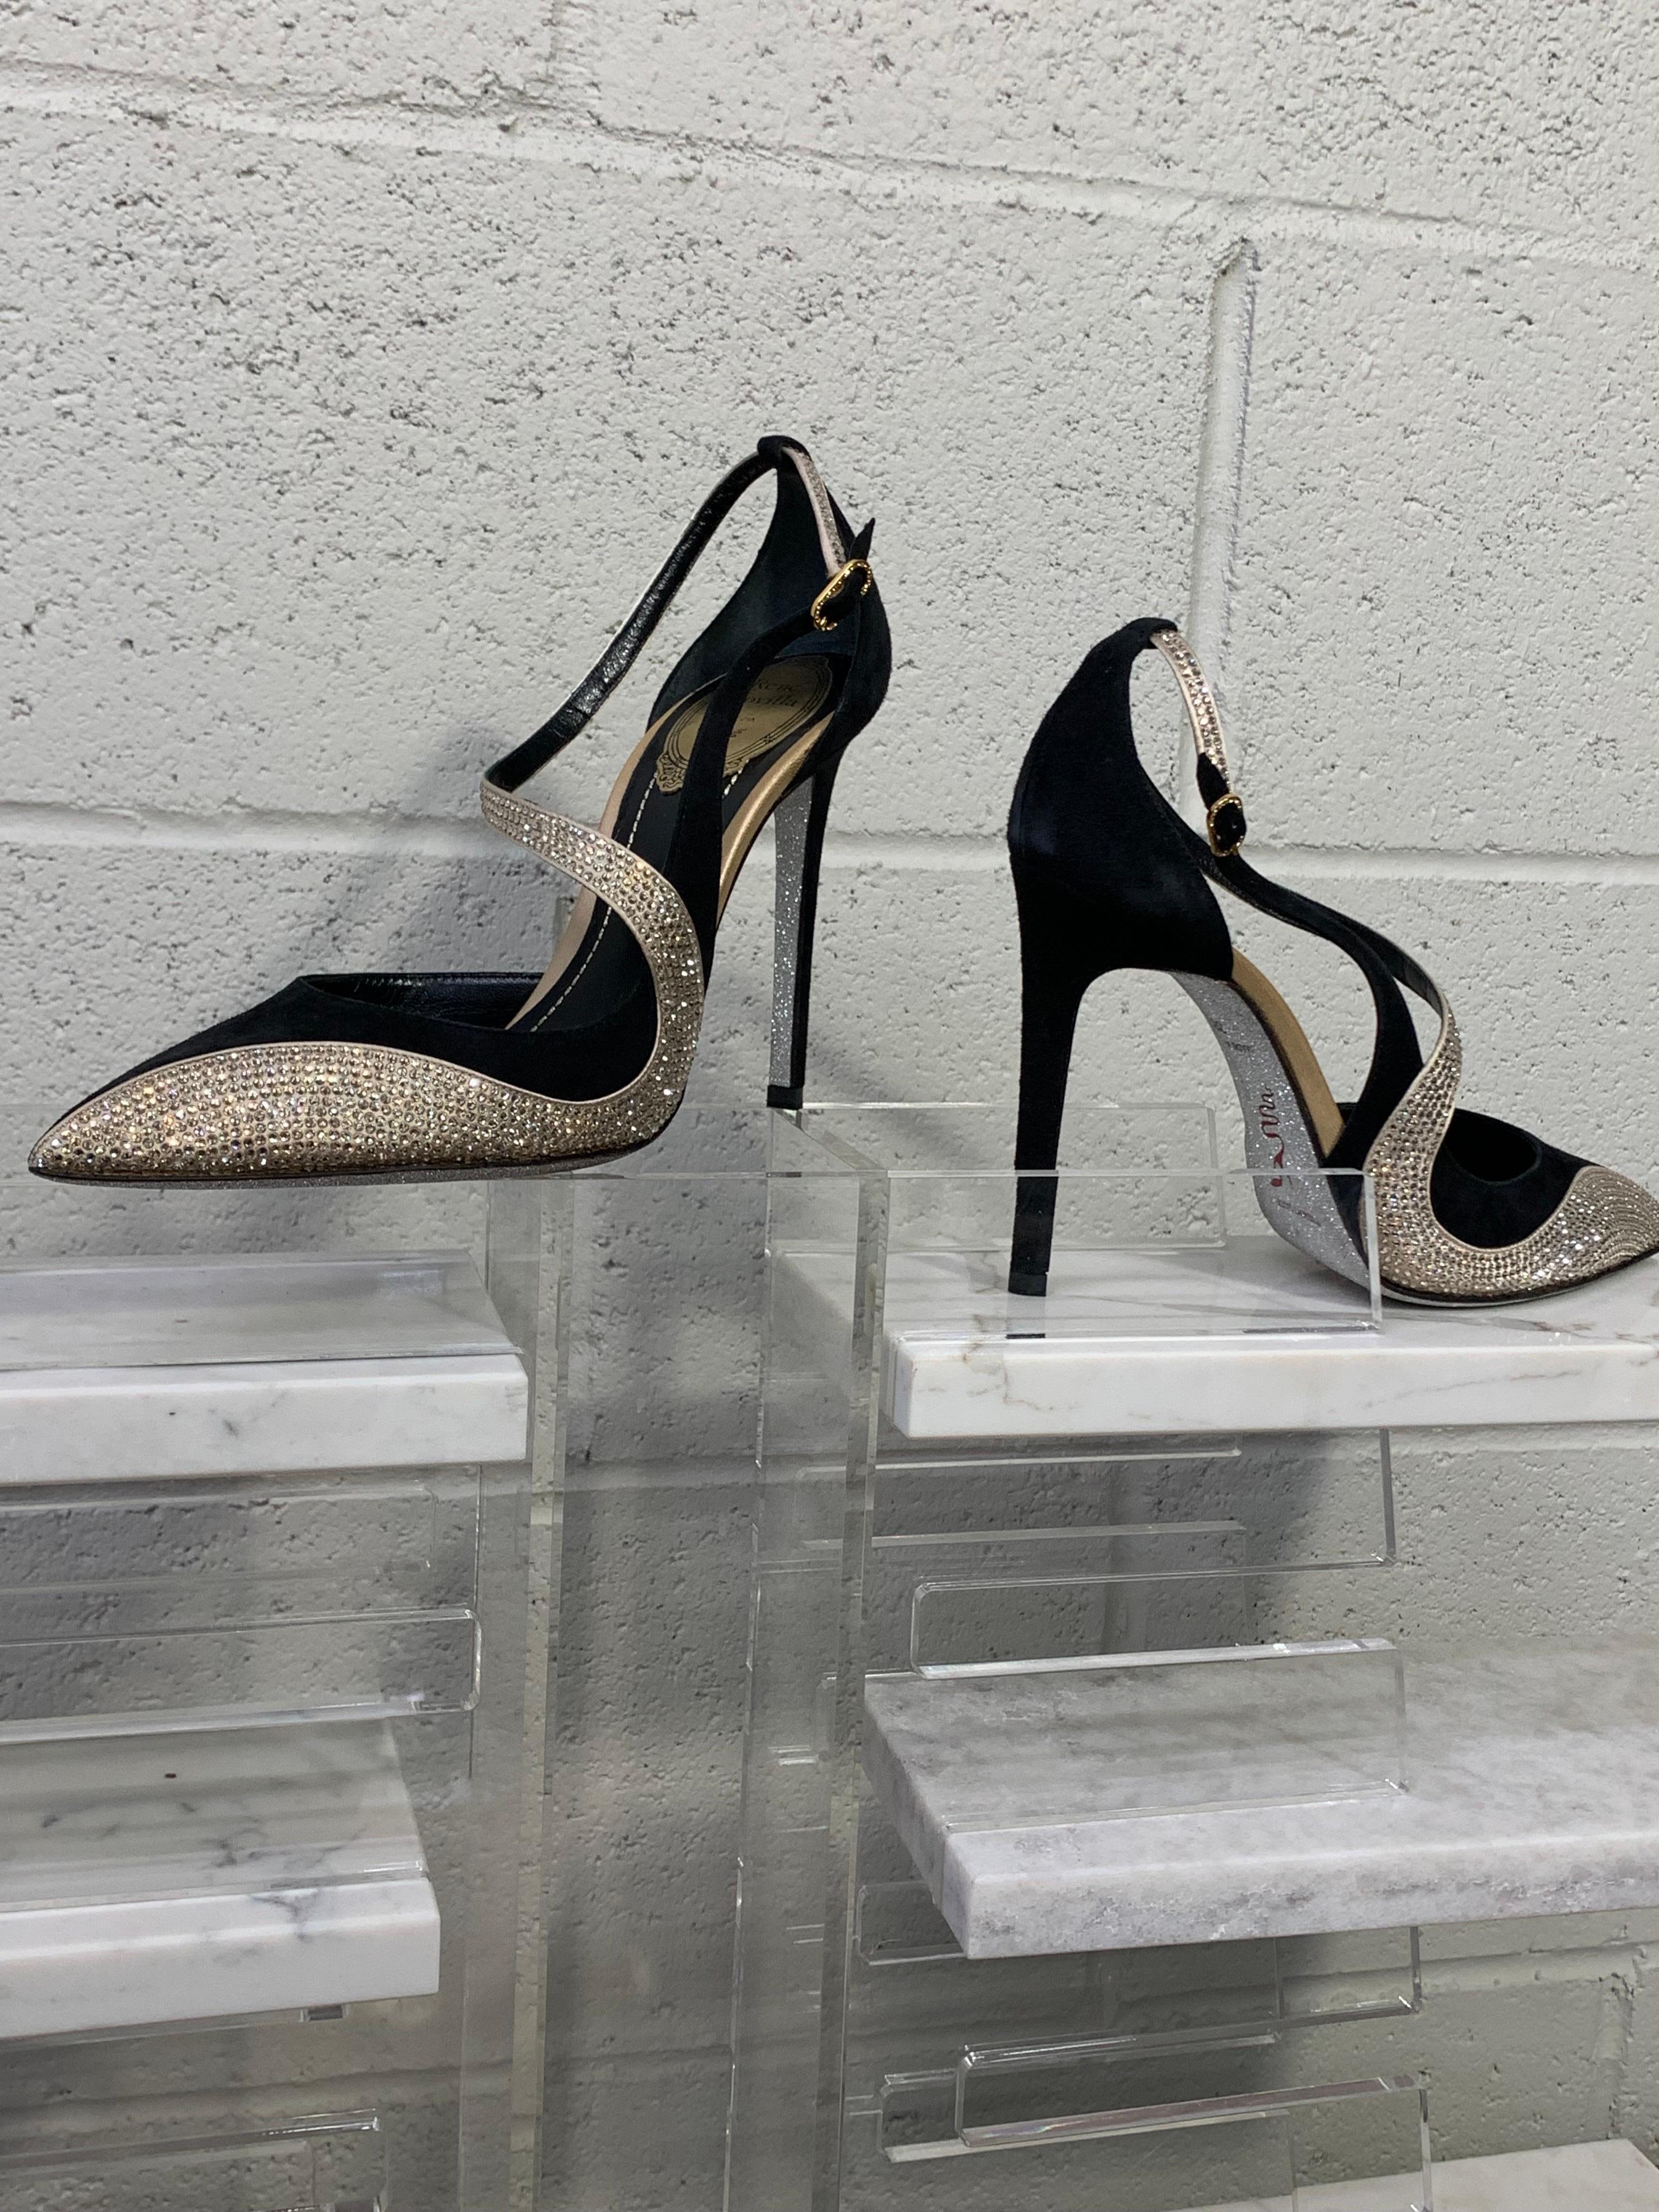 René Caovilla Serpentine Champagne Micro-Crystal and Black Suede Strappy Closed-Toe Pump: High heel, with side buckle closure. New, never worn, with silver sparkle soles. Size 38/8B. Original box included. 